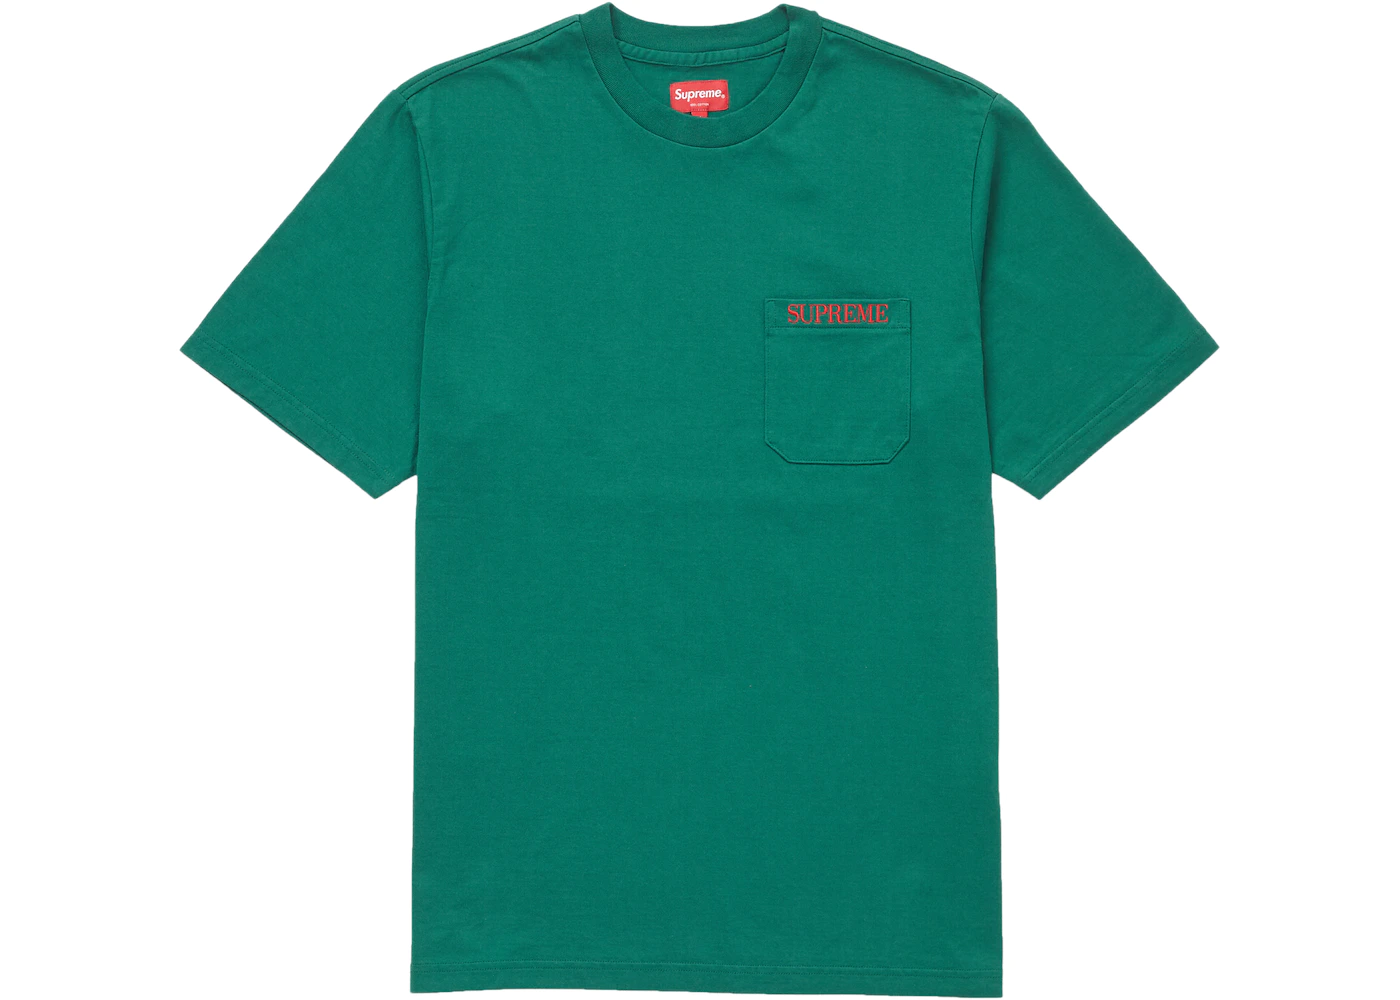 Supreme Embroidered Pocket Tee Green Men's - FW18 - US